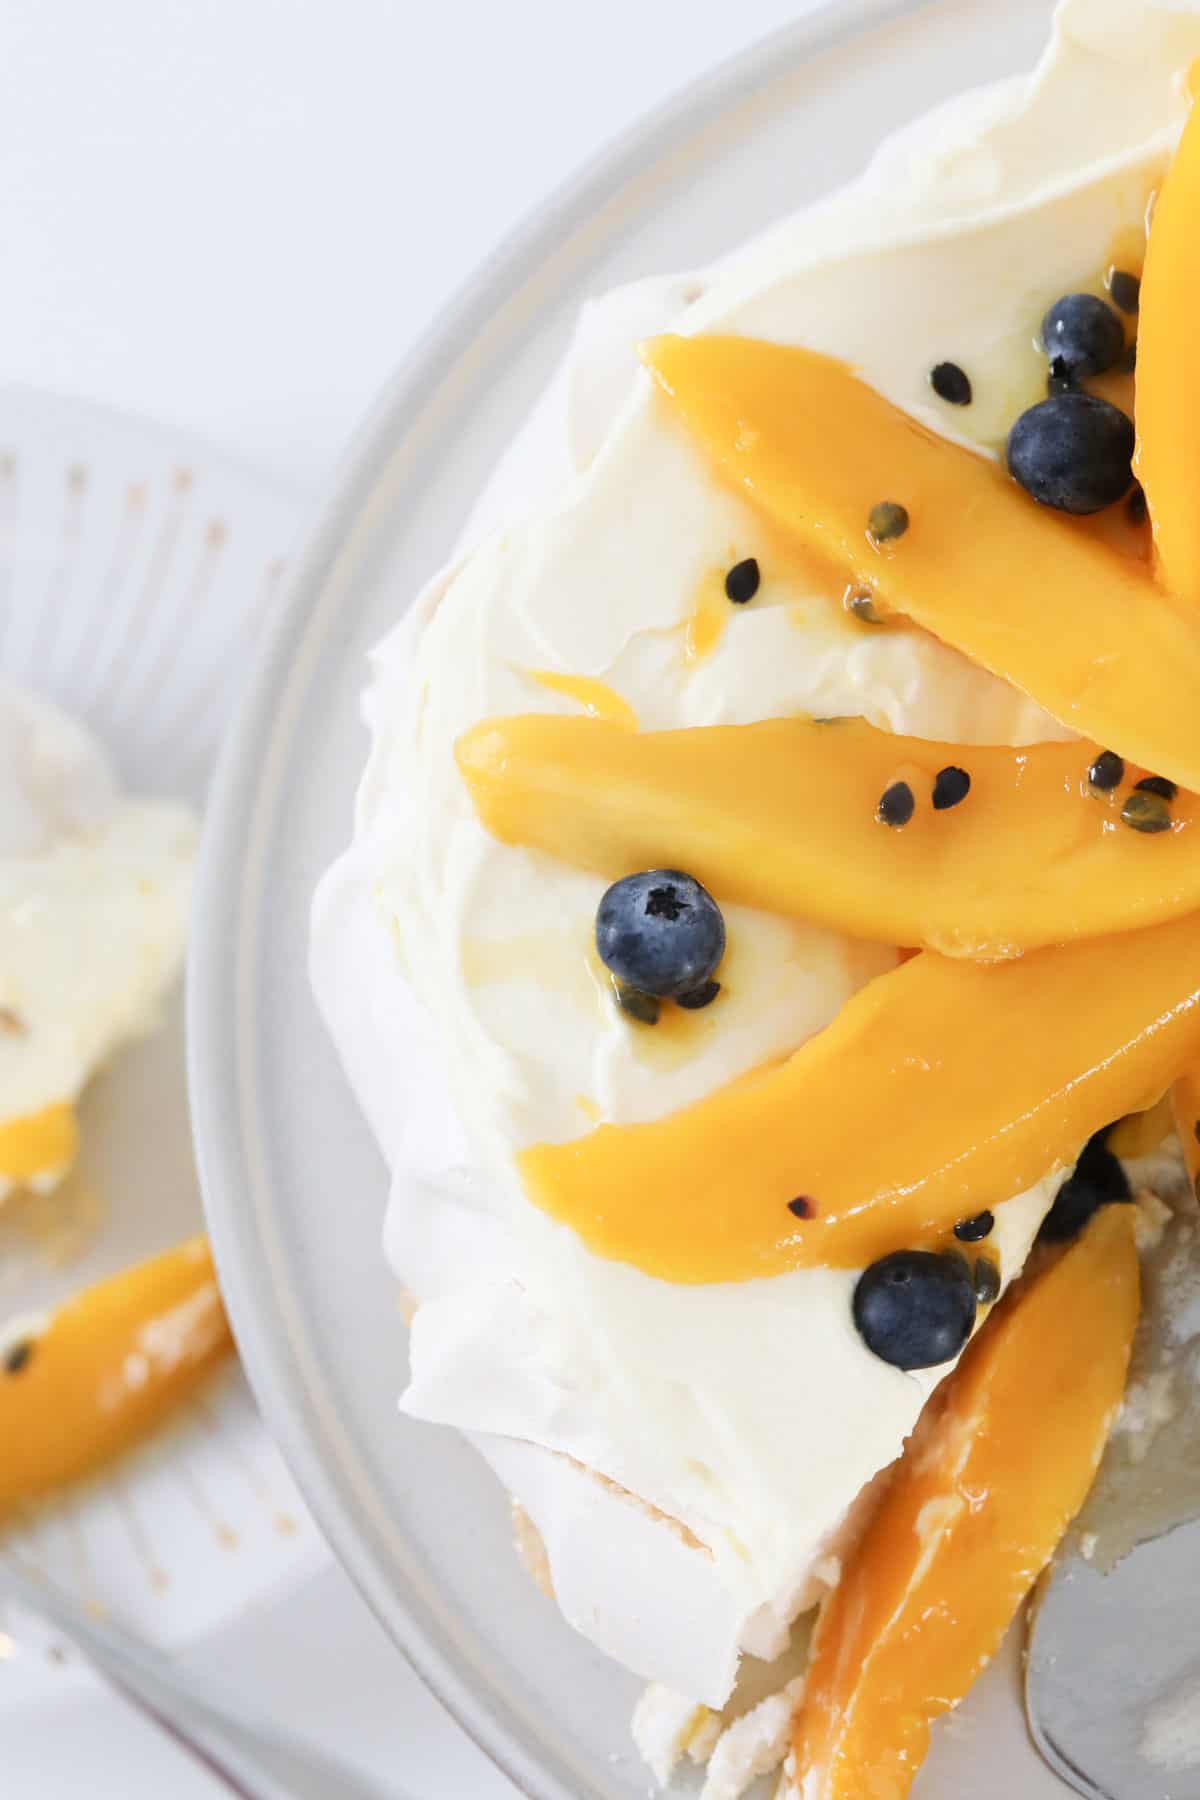 Top view of the pavlova decorated with mango and passionfruit.